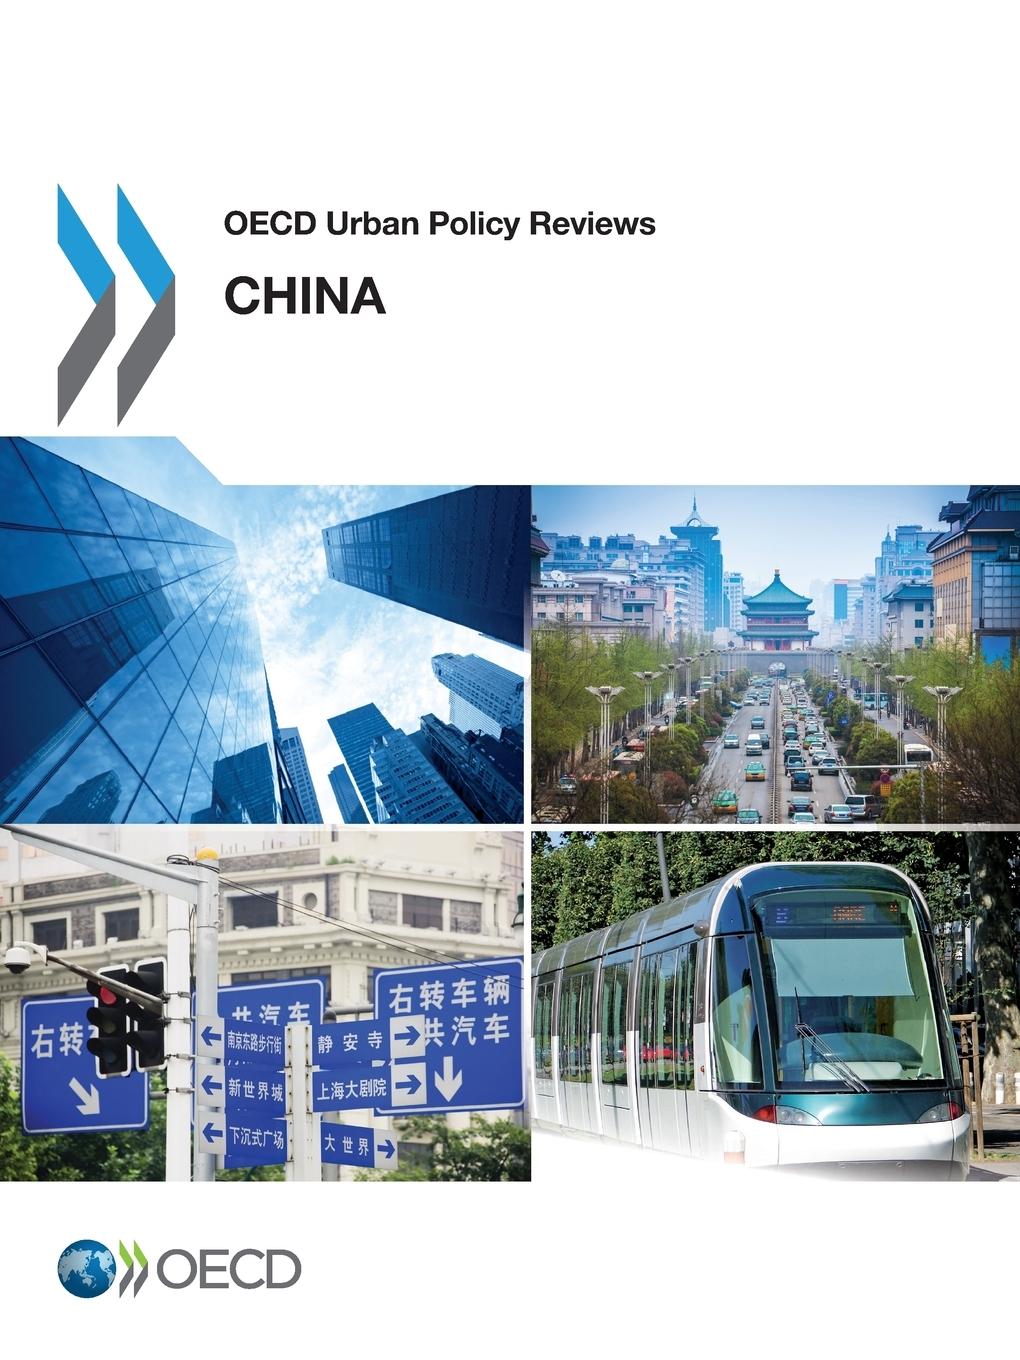 OECD URBAN POLICY REVIEWS - Oecd